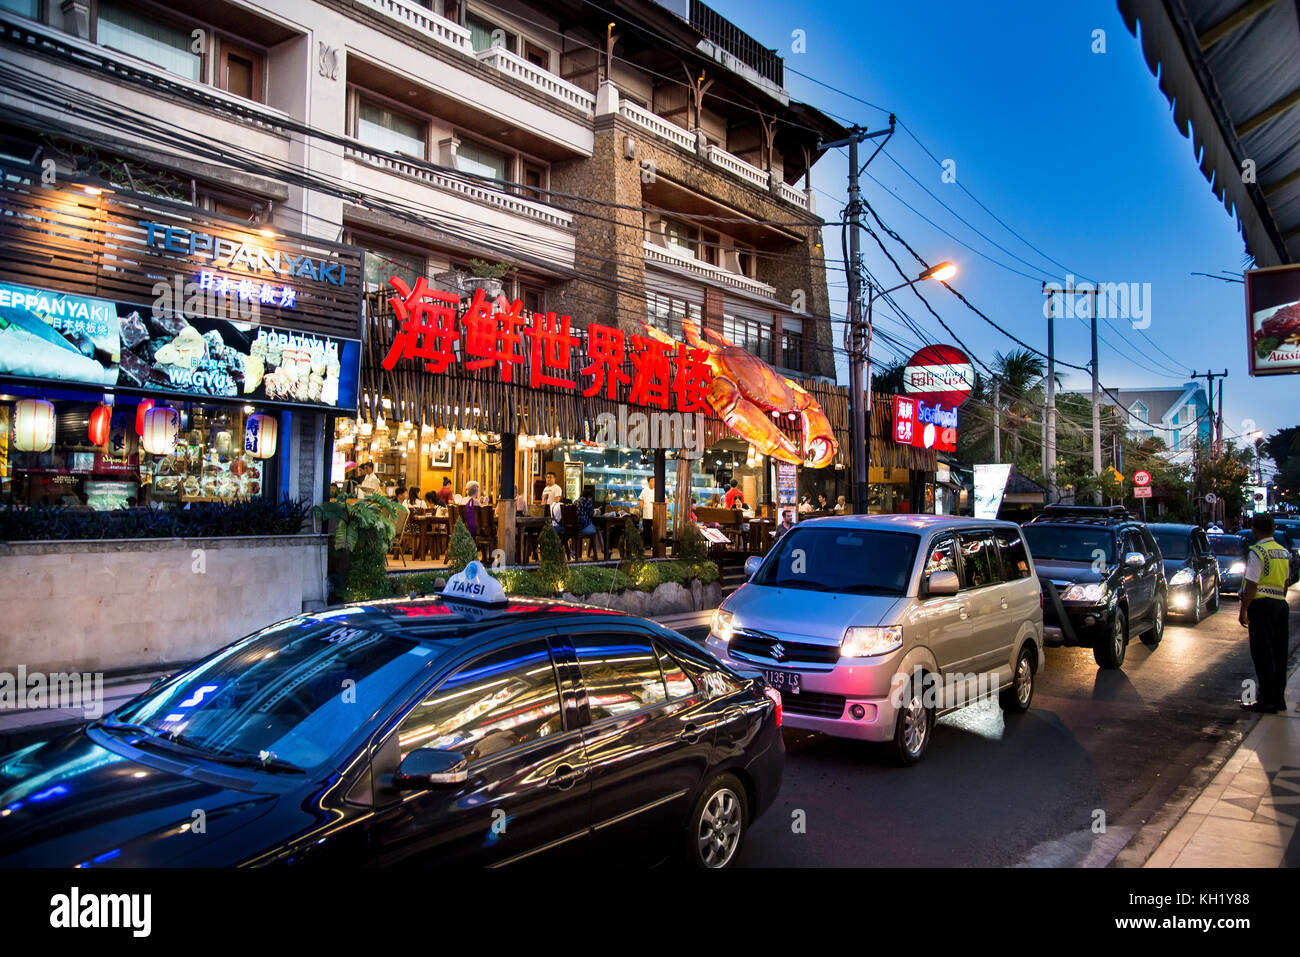 Bali, Indonesia - July 04, 2017. A Street view in Kuta. Restaurants houses and traffic on the scene. Stock Photo